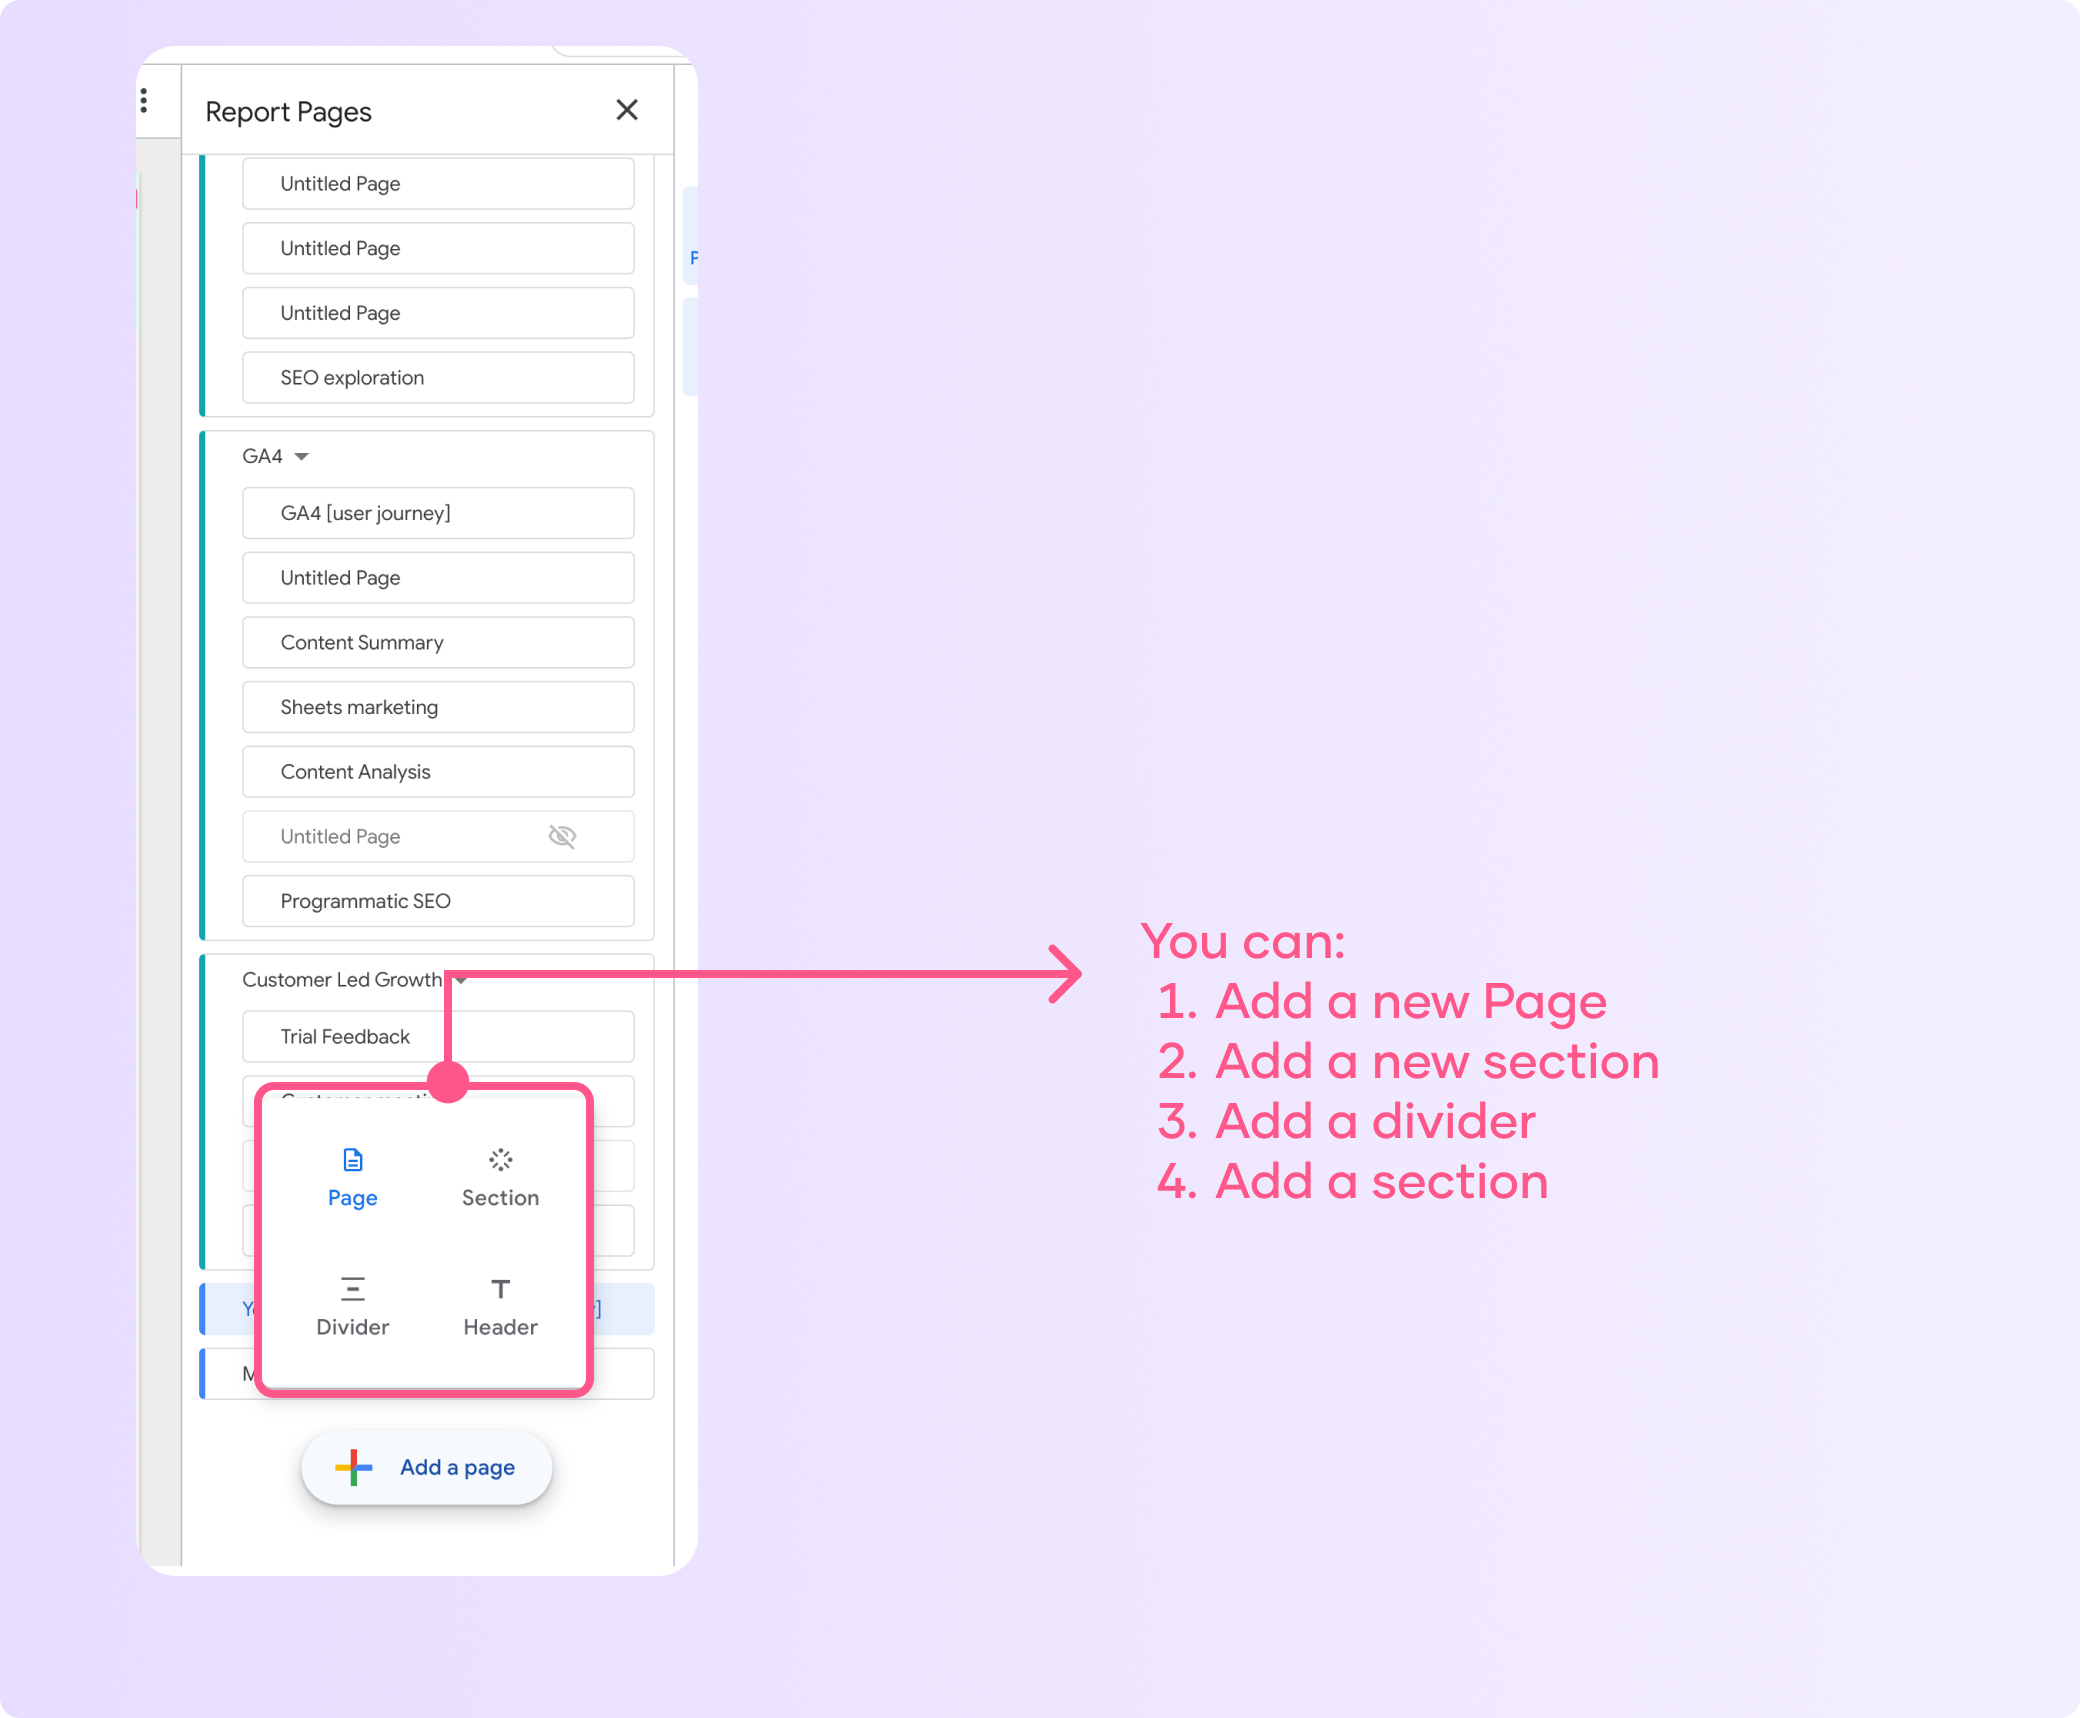 How to manage pages on Looker Studio